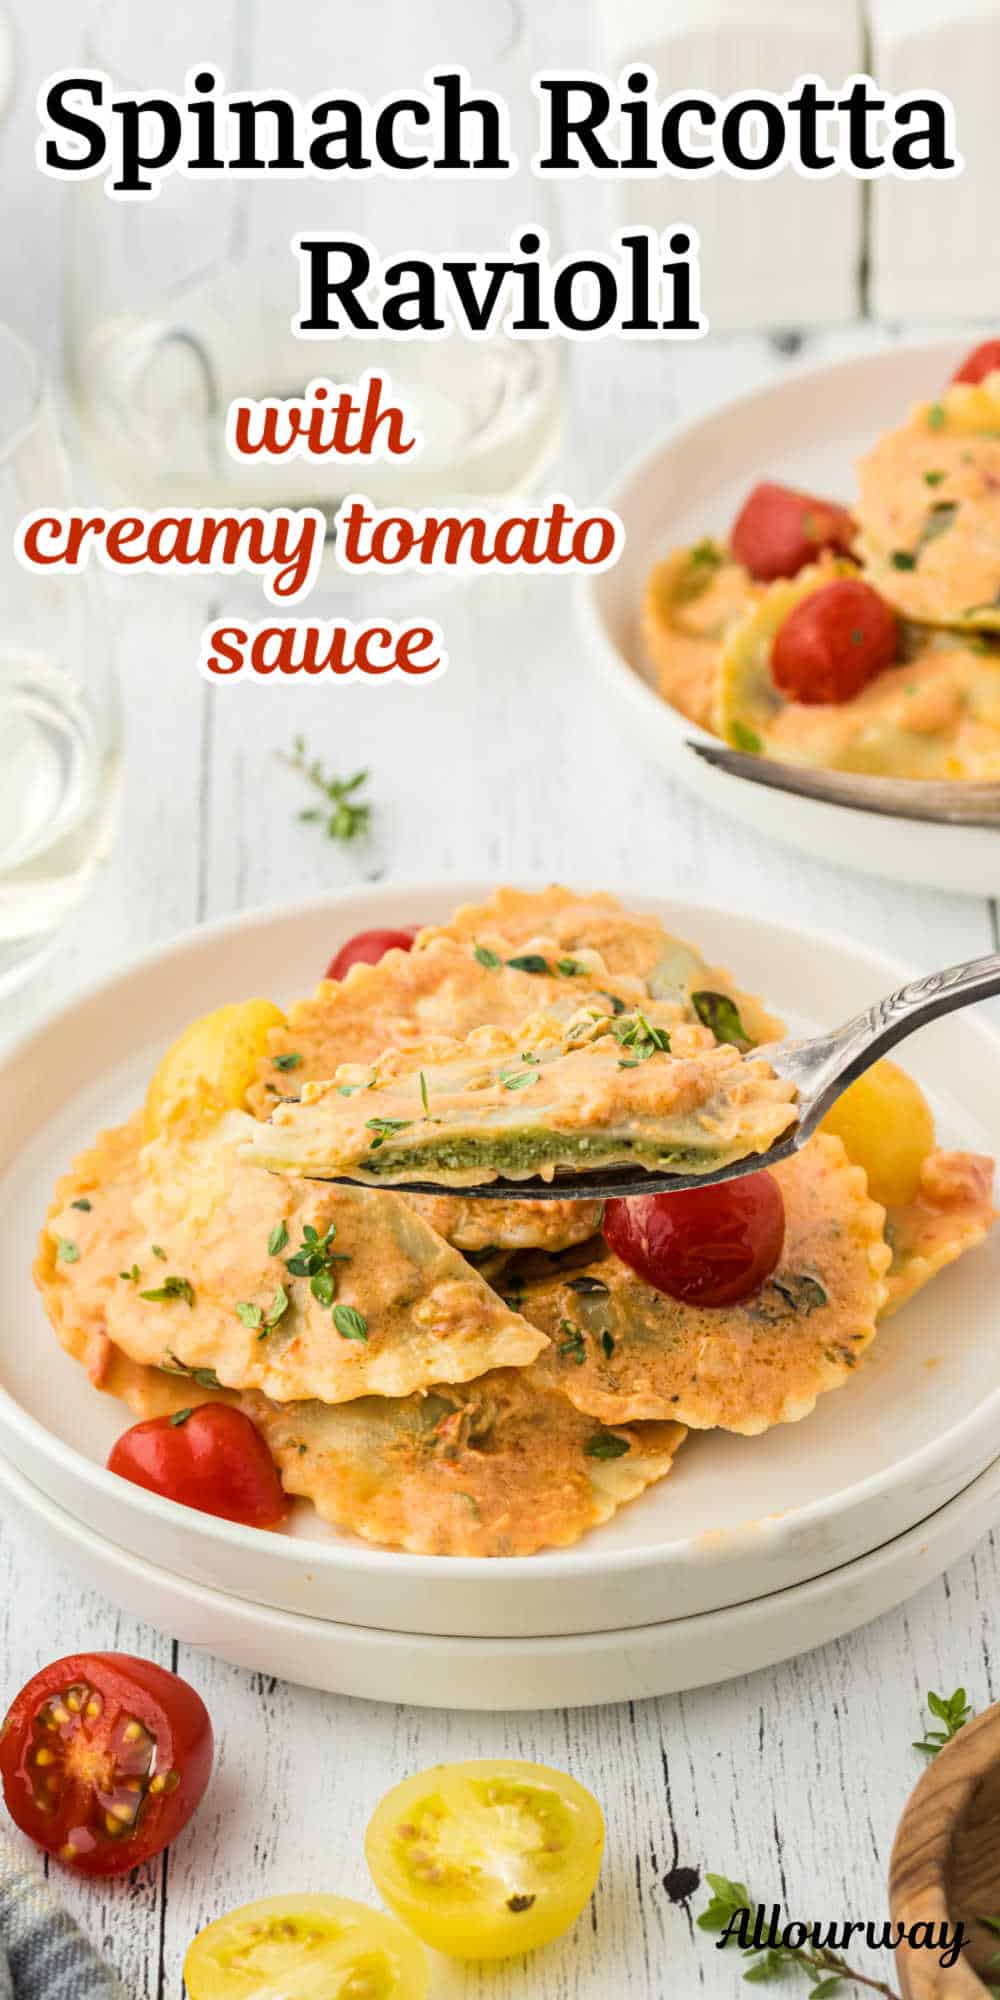 Dive into tender, handmade pasta ravioli pillows stuffed with a luscious blend of creamy ricotta cheese and fresh spinach. Our Tomato Cream Sauce is the perfect companion for this culinary masterpiece for this family favorite pasta dinner.